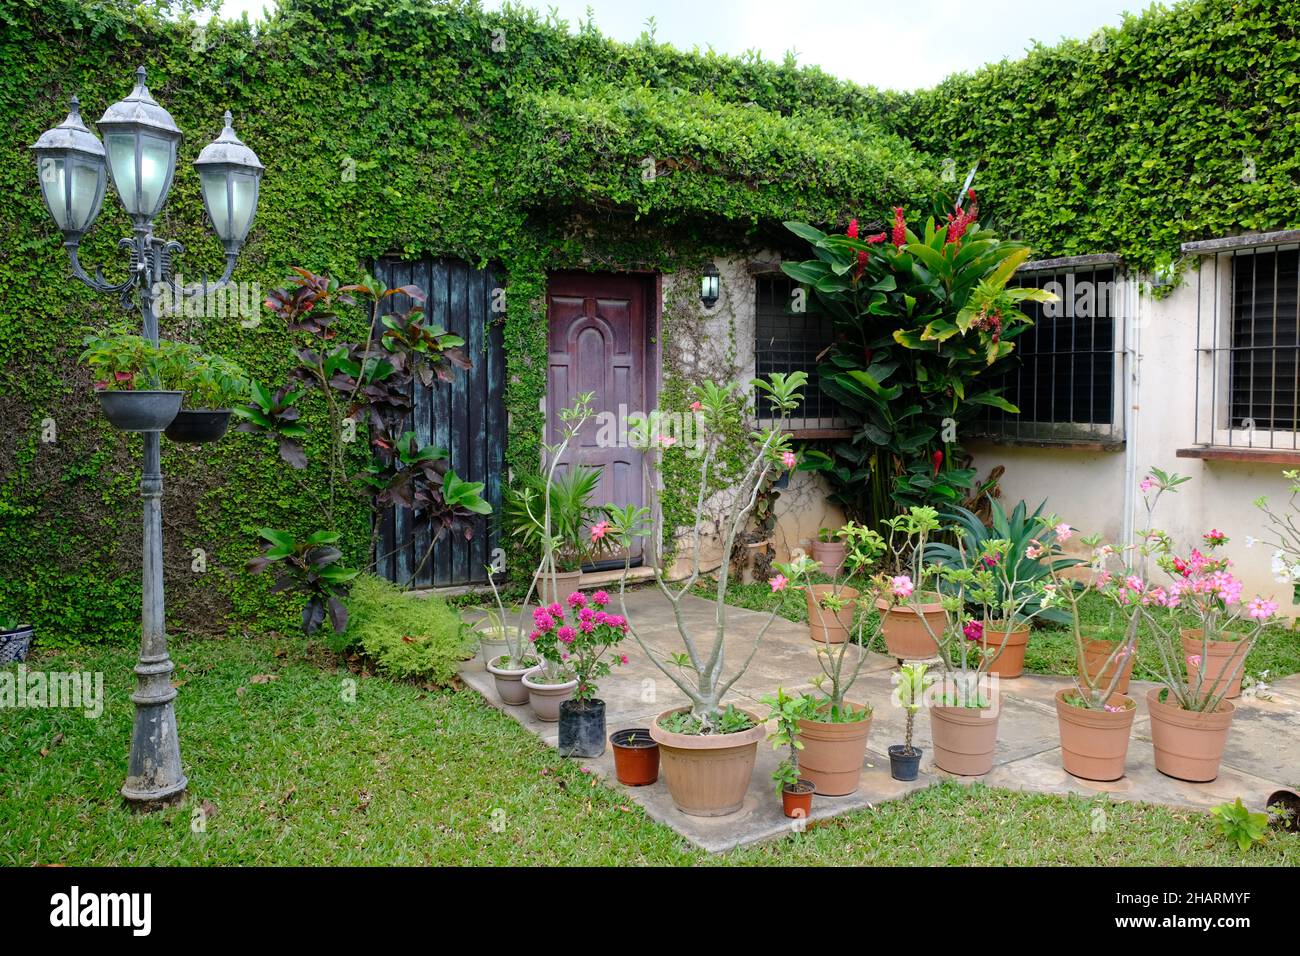 Mexico Valladolid - Beautiful garden of a town house Stock Photo